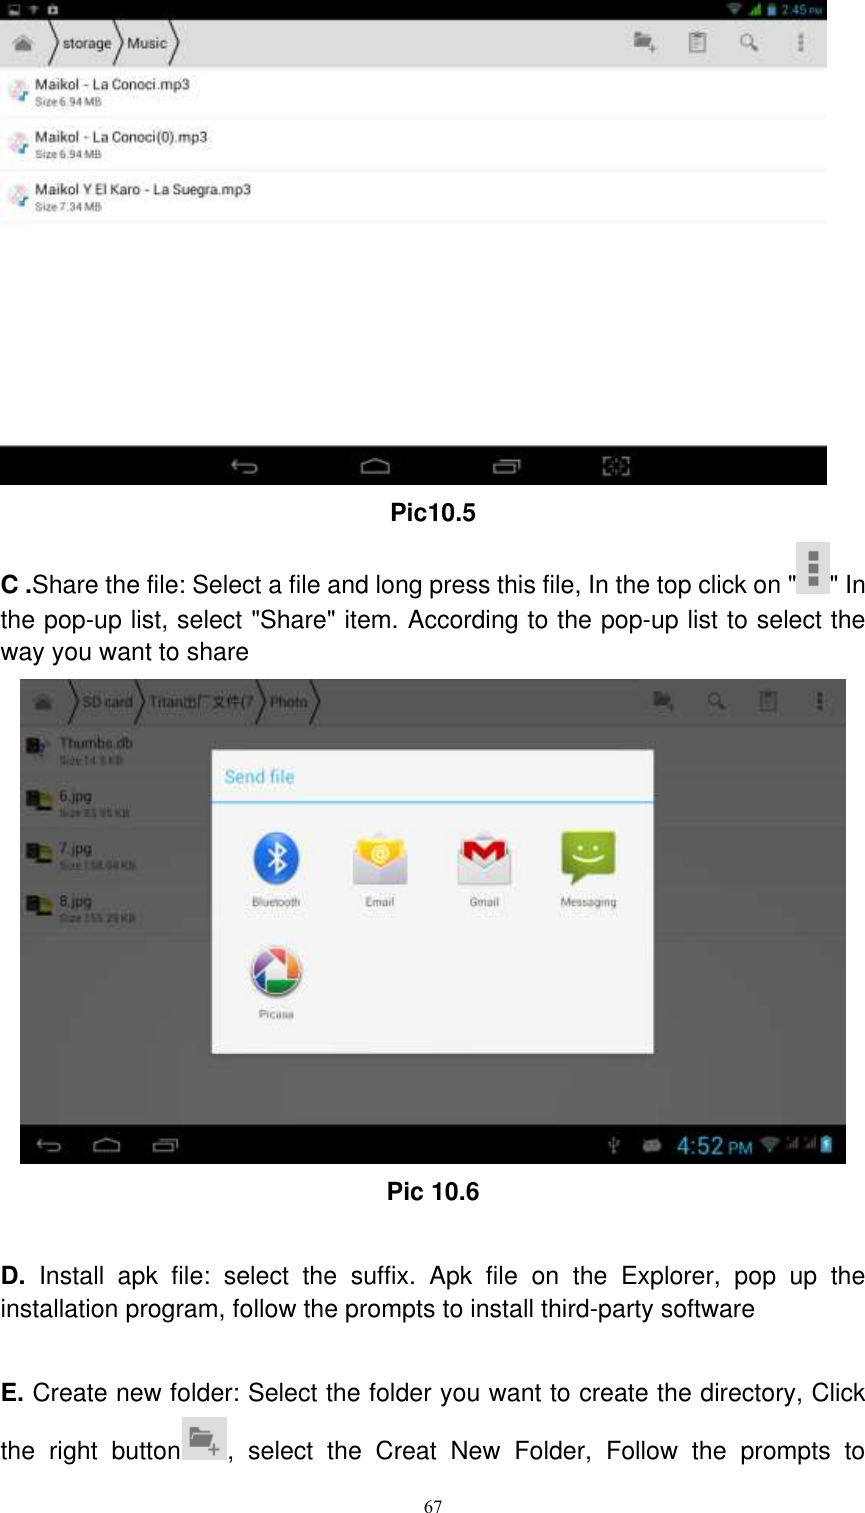      67  Pic10.5 C .Share the file: Select a file and long press this file, In the top click on &quot; &quot; In the pop-up list, select &quot;Share&quot; item. According to the pop-up list to select the way you want to share  Pic 10.6  D.  Install  apk  file:  select  the  suffix.  Apk  file  on  the  Explorer,  pop  up  the installation program, follow the prompts to install third-party software  E. Create new folder: Select the folder you want to create the directory, Click the  right  button ,  select  the  Creat  New  Folder,  Follow  the  prompts  to 